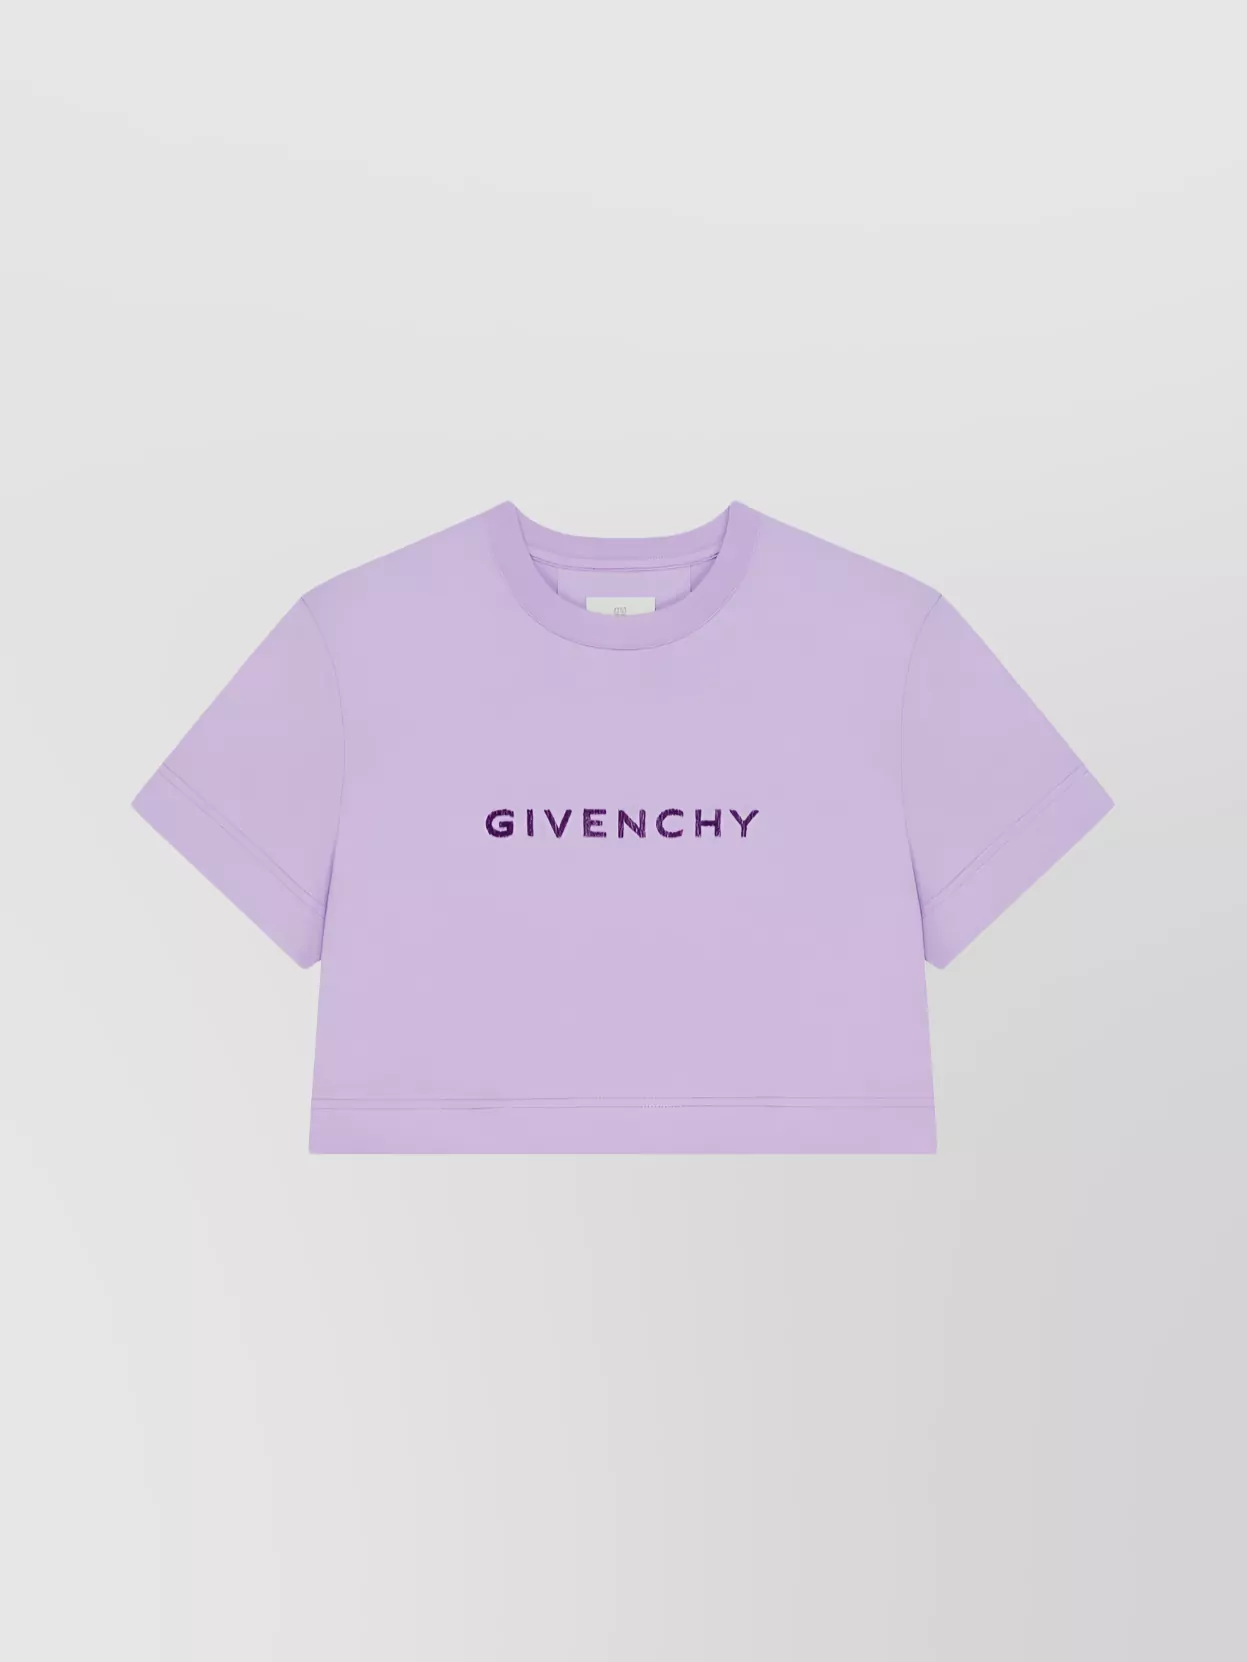 Givenchy Cropped Crew Neck T-shirt With Signature Tufted Design In Pastel